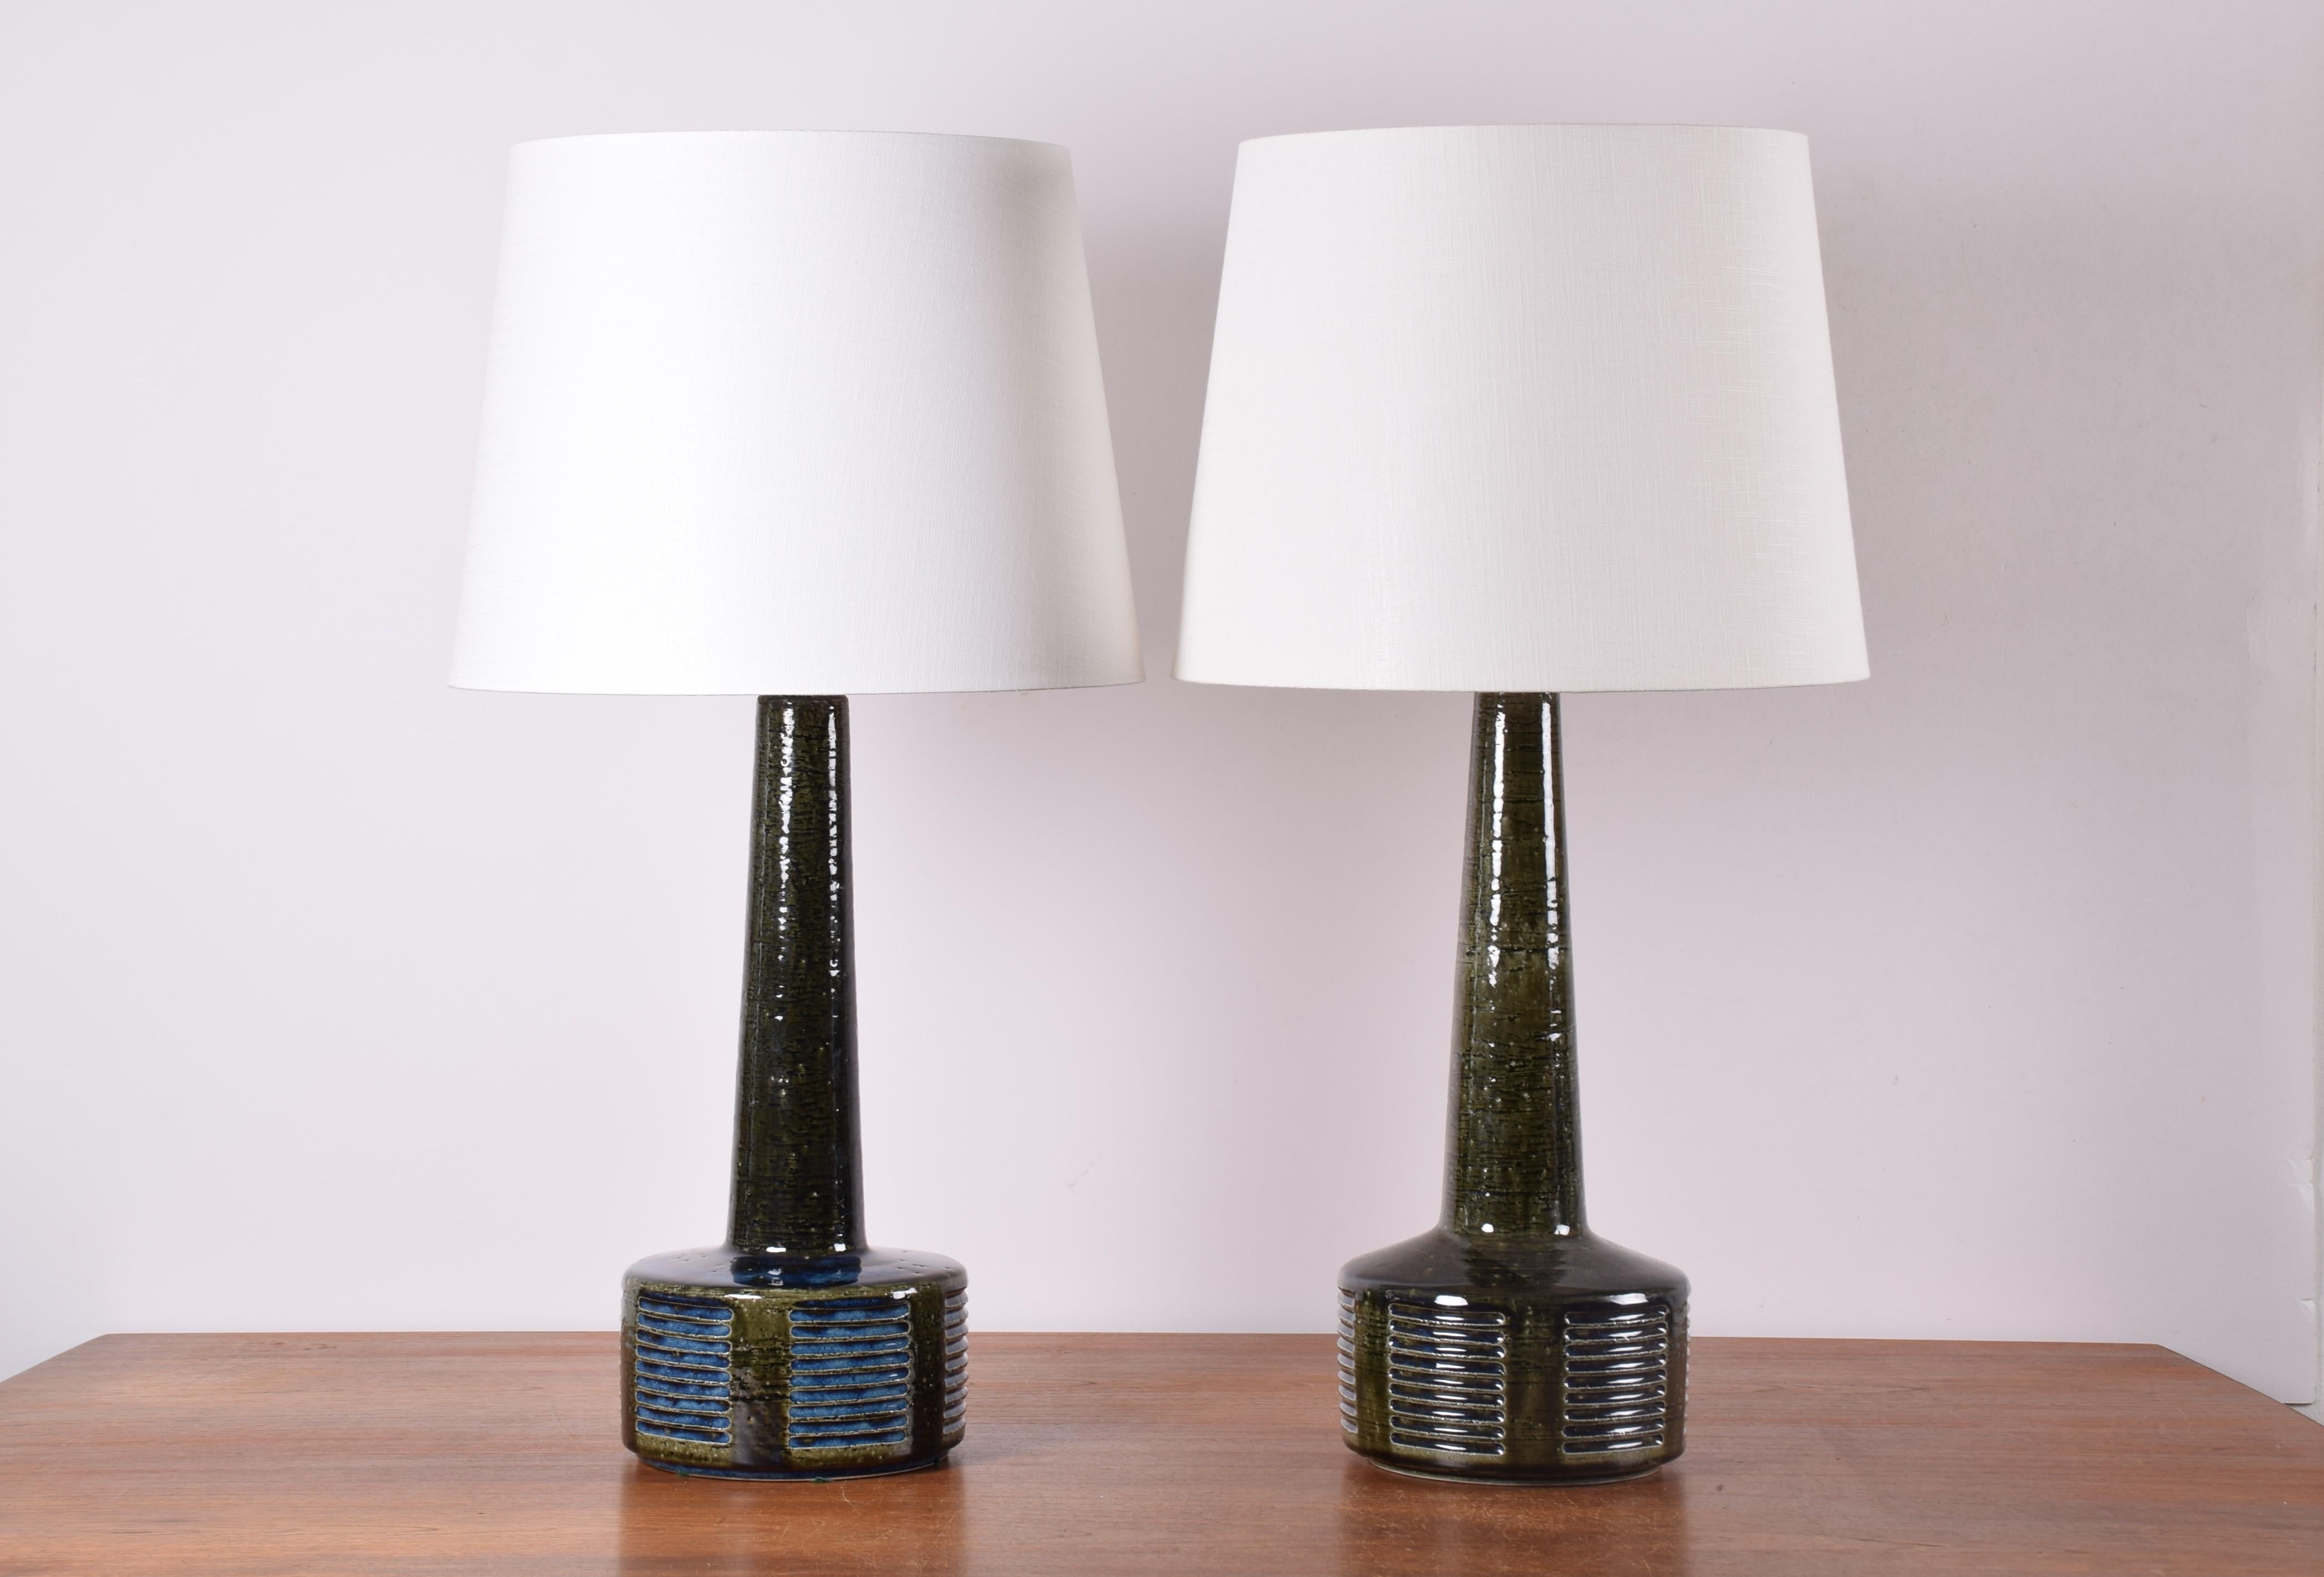 Pair of vintage Palshus Denmark tall ceramic lamps including new quality lamp shades!

The lamps were designed by Per Linnemann-Schmidt and produced circa 1960s. The glaze is bottle green with cobalt blue and they are made with chamotte clay which